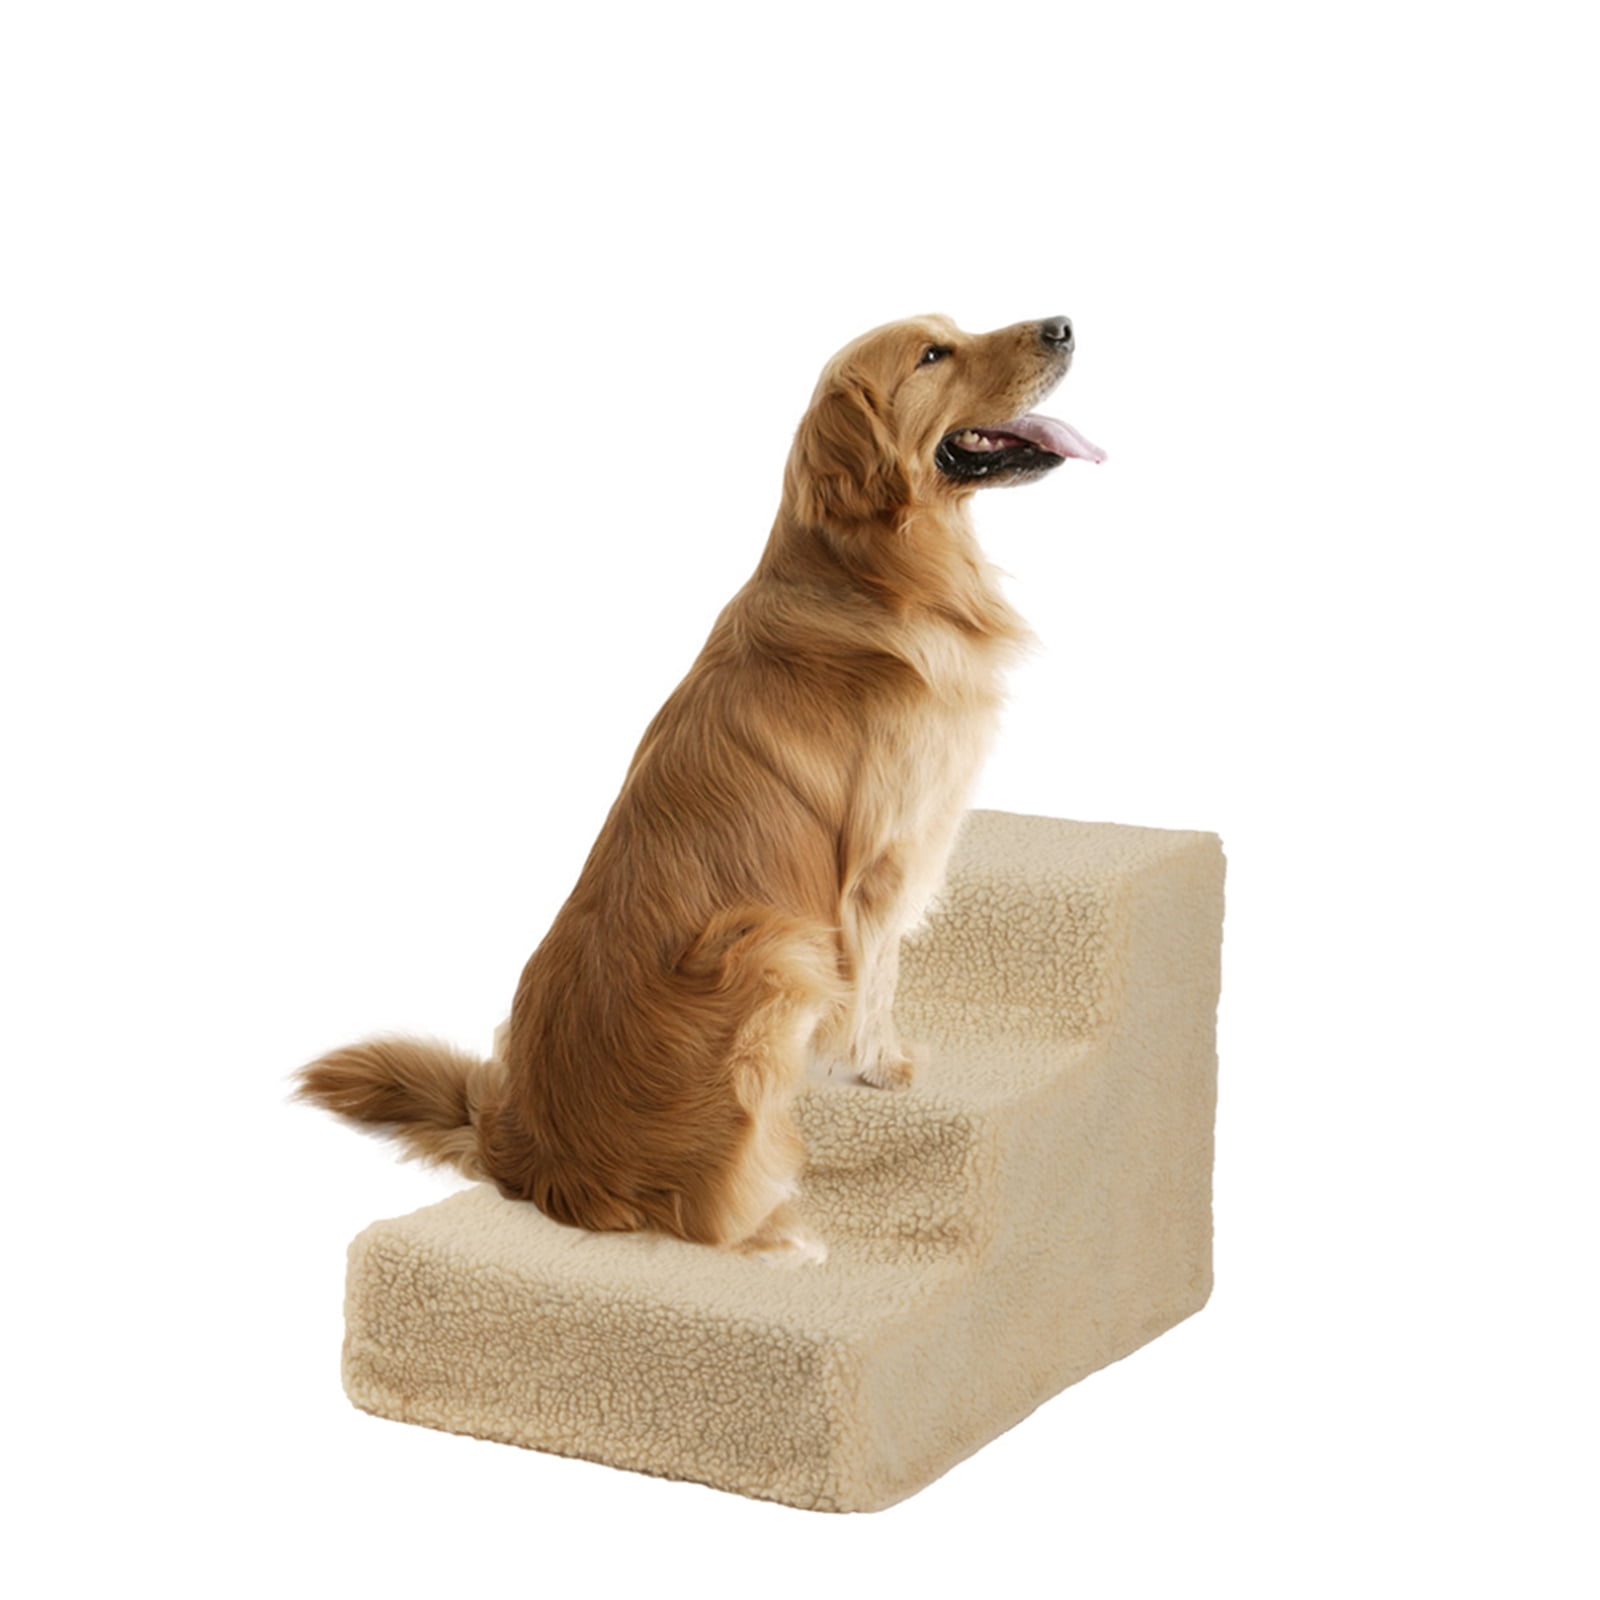 Sofa/Car/High Bed Dog Stairs Foldable Wooden Pet Steps/Stairs with Non-Slip Surface and Sponge Foam Large 2/4 File Pets Ramp for Dogs and Cats